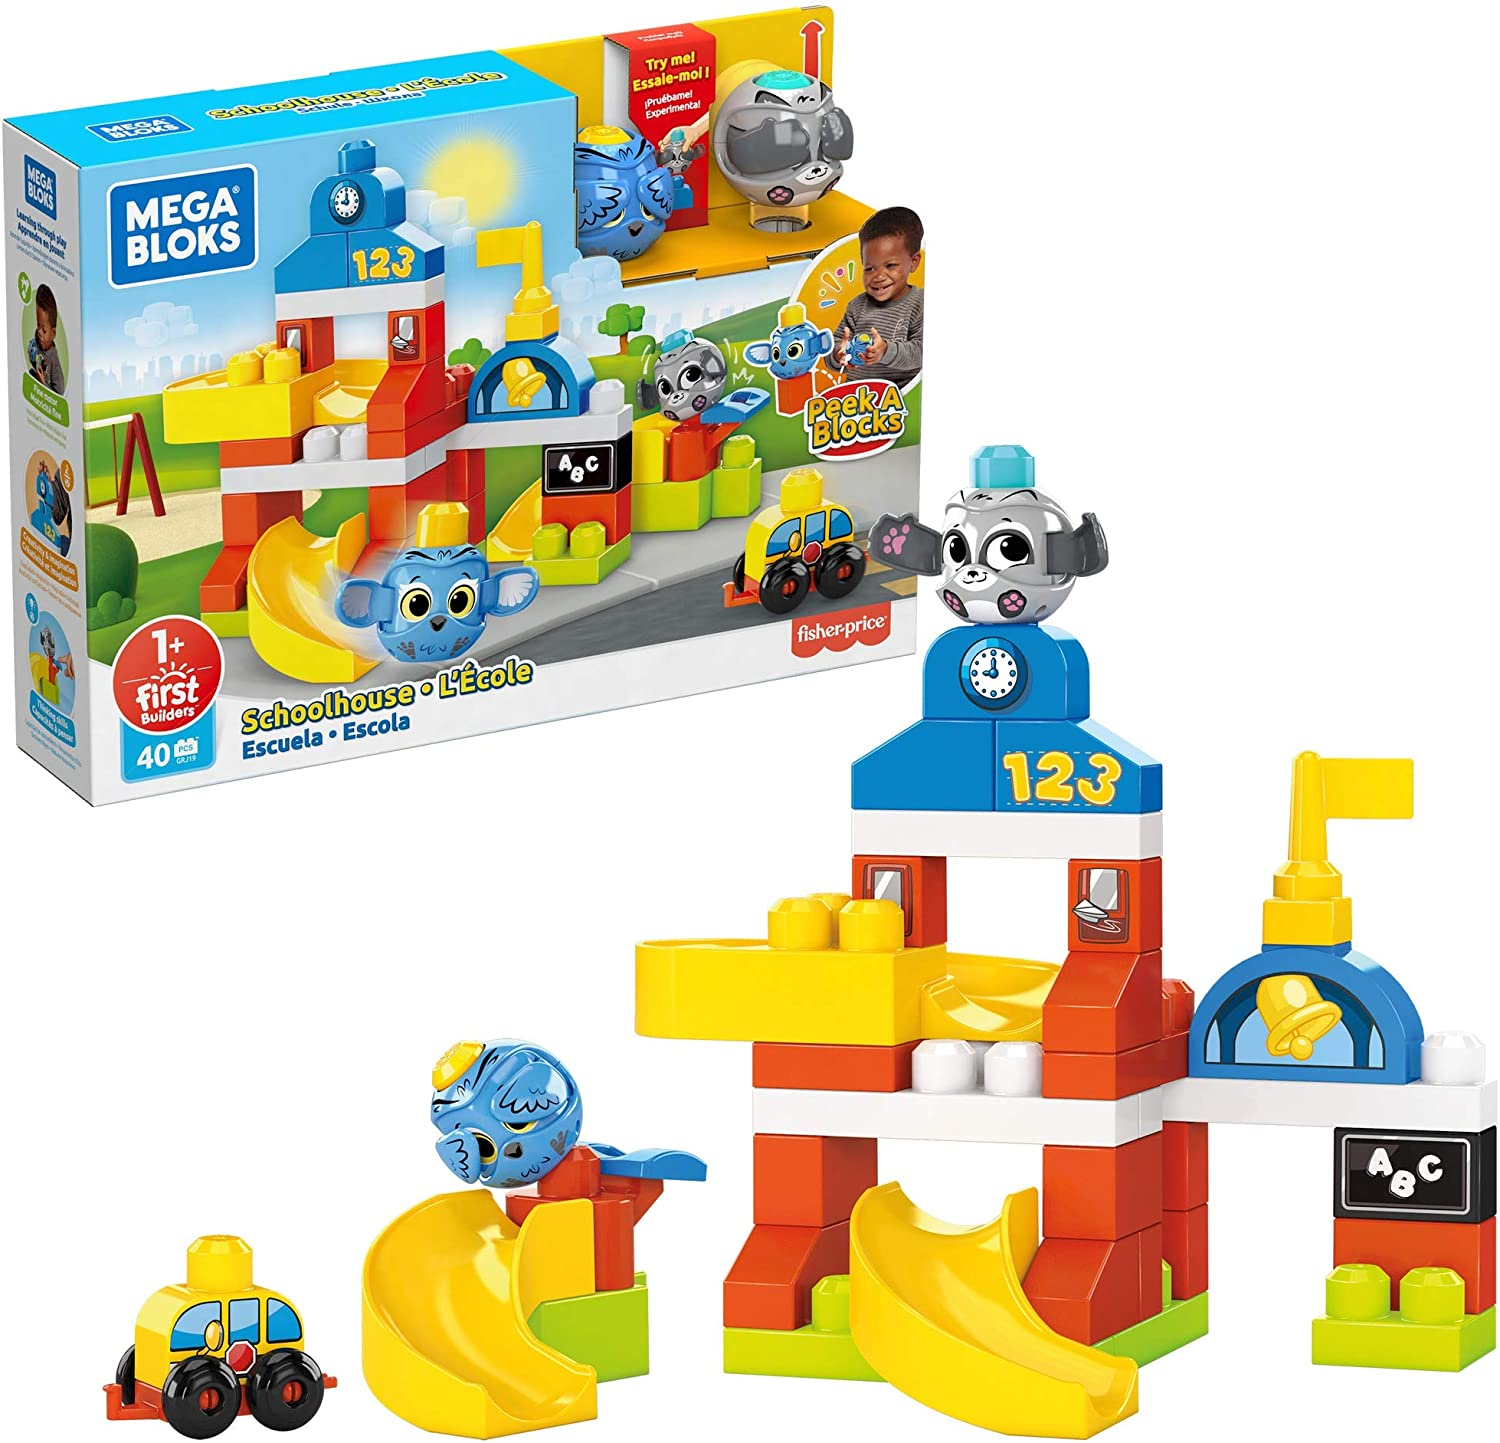 The best toys for one-year-olds that are both entertaining and educational